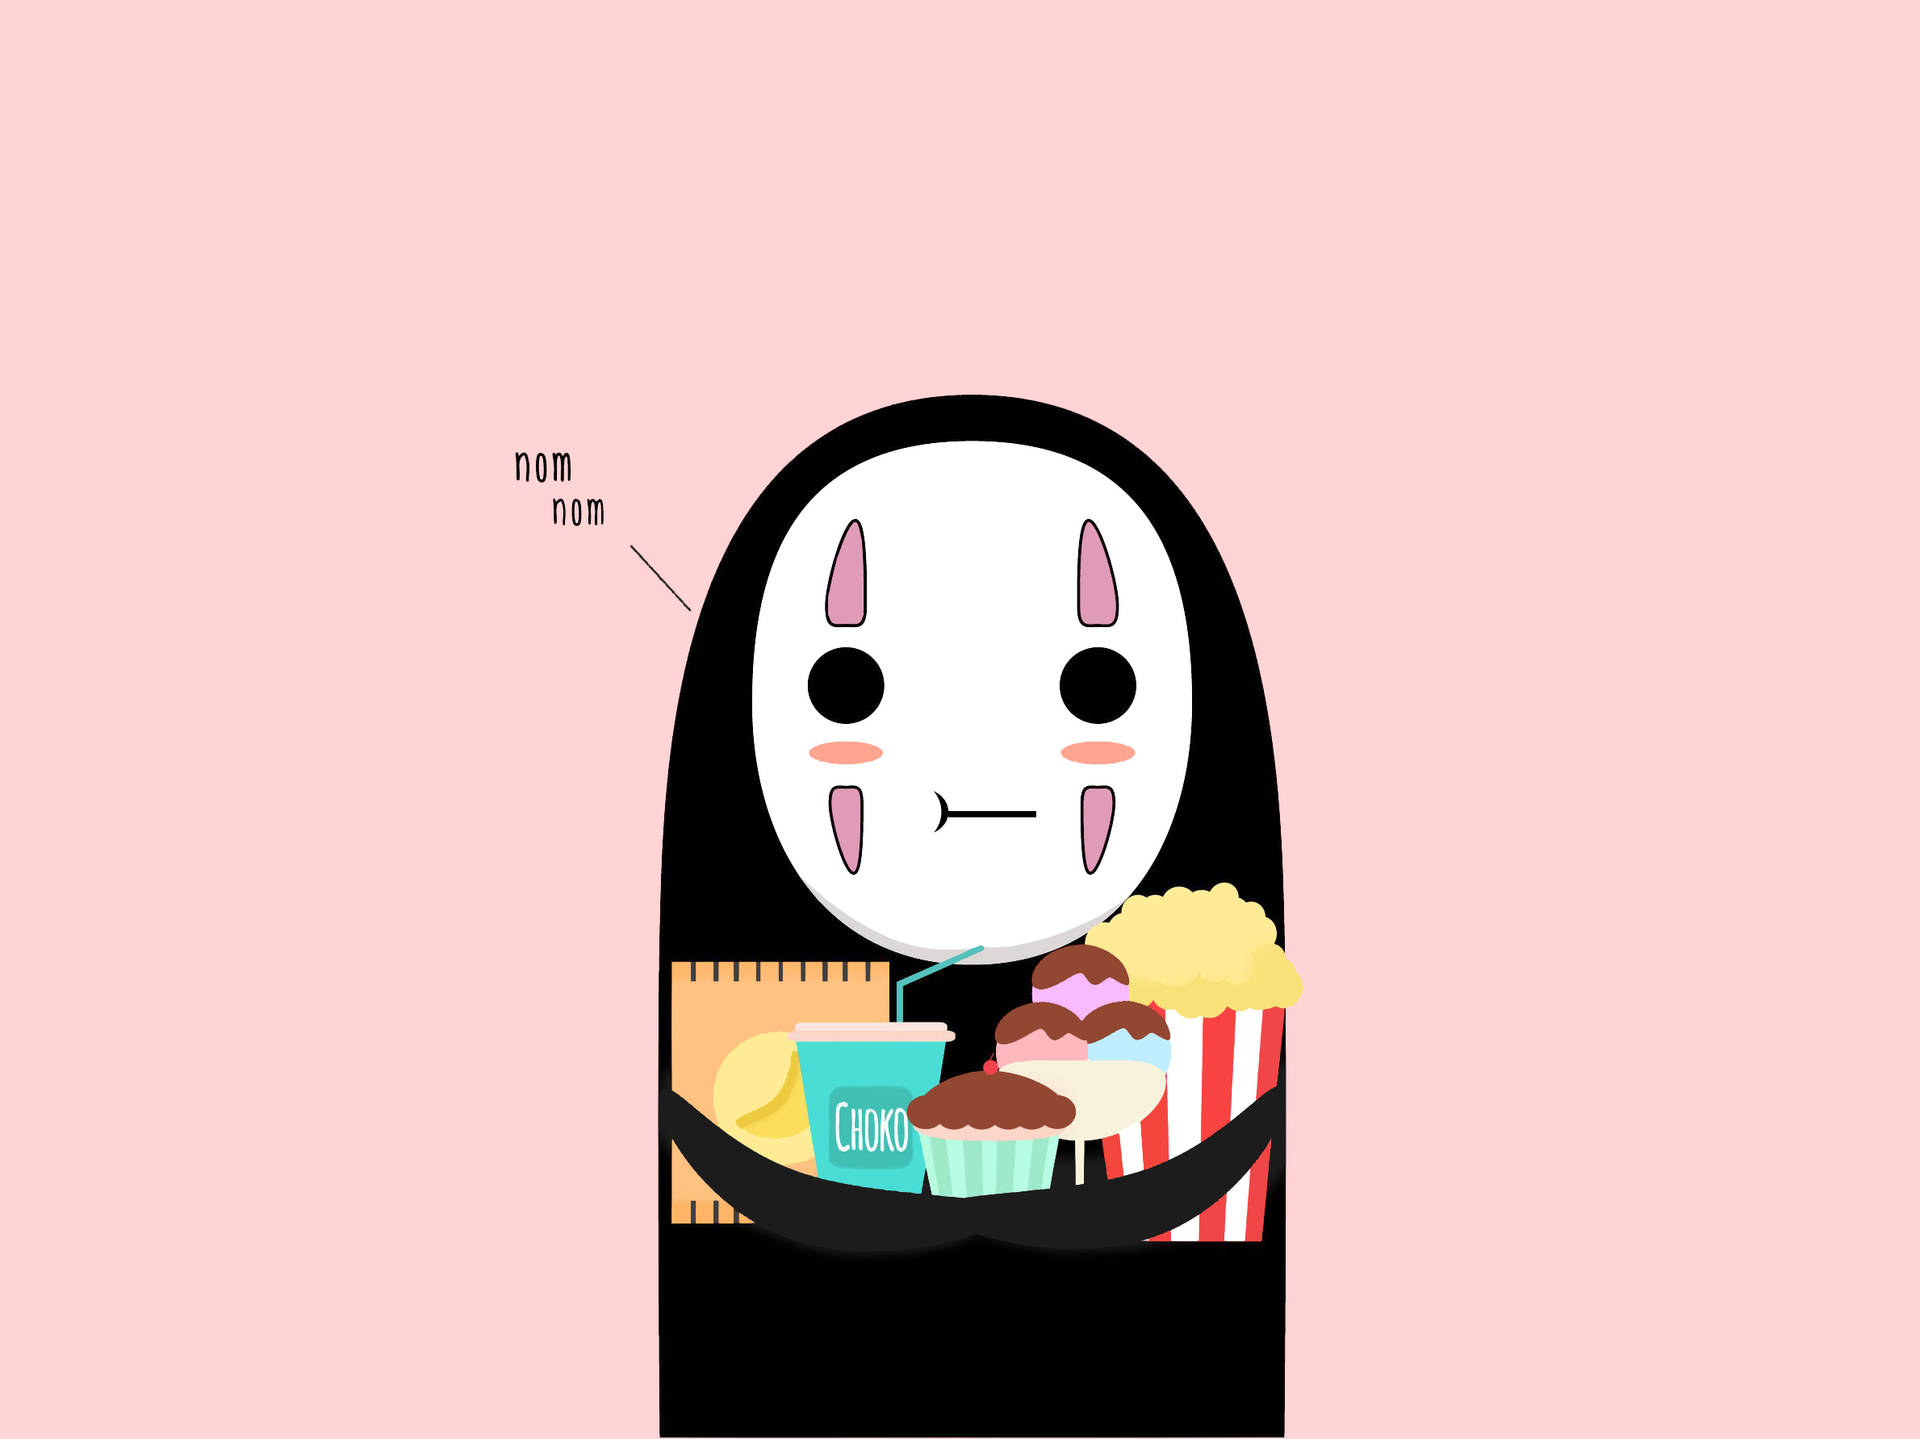 Free No Face Wallpaper Downloads, [100+] No Face Wallpapers for FREE |  